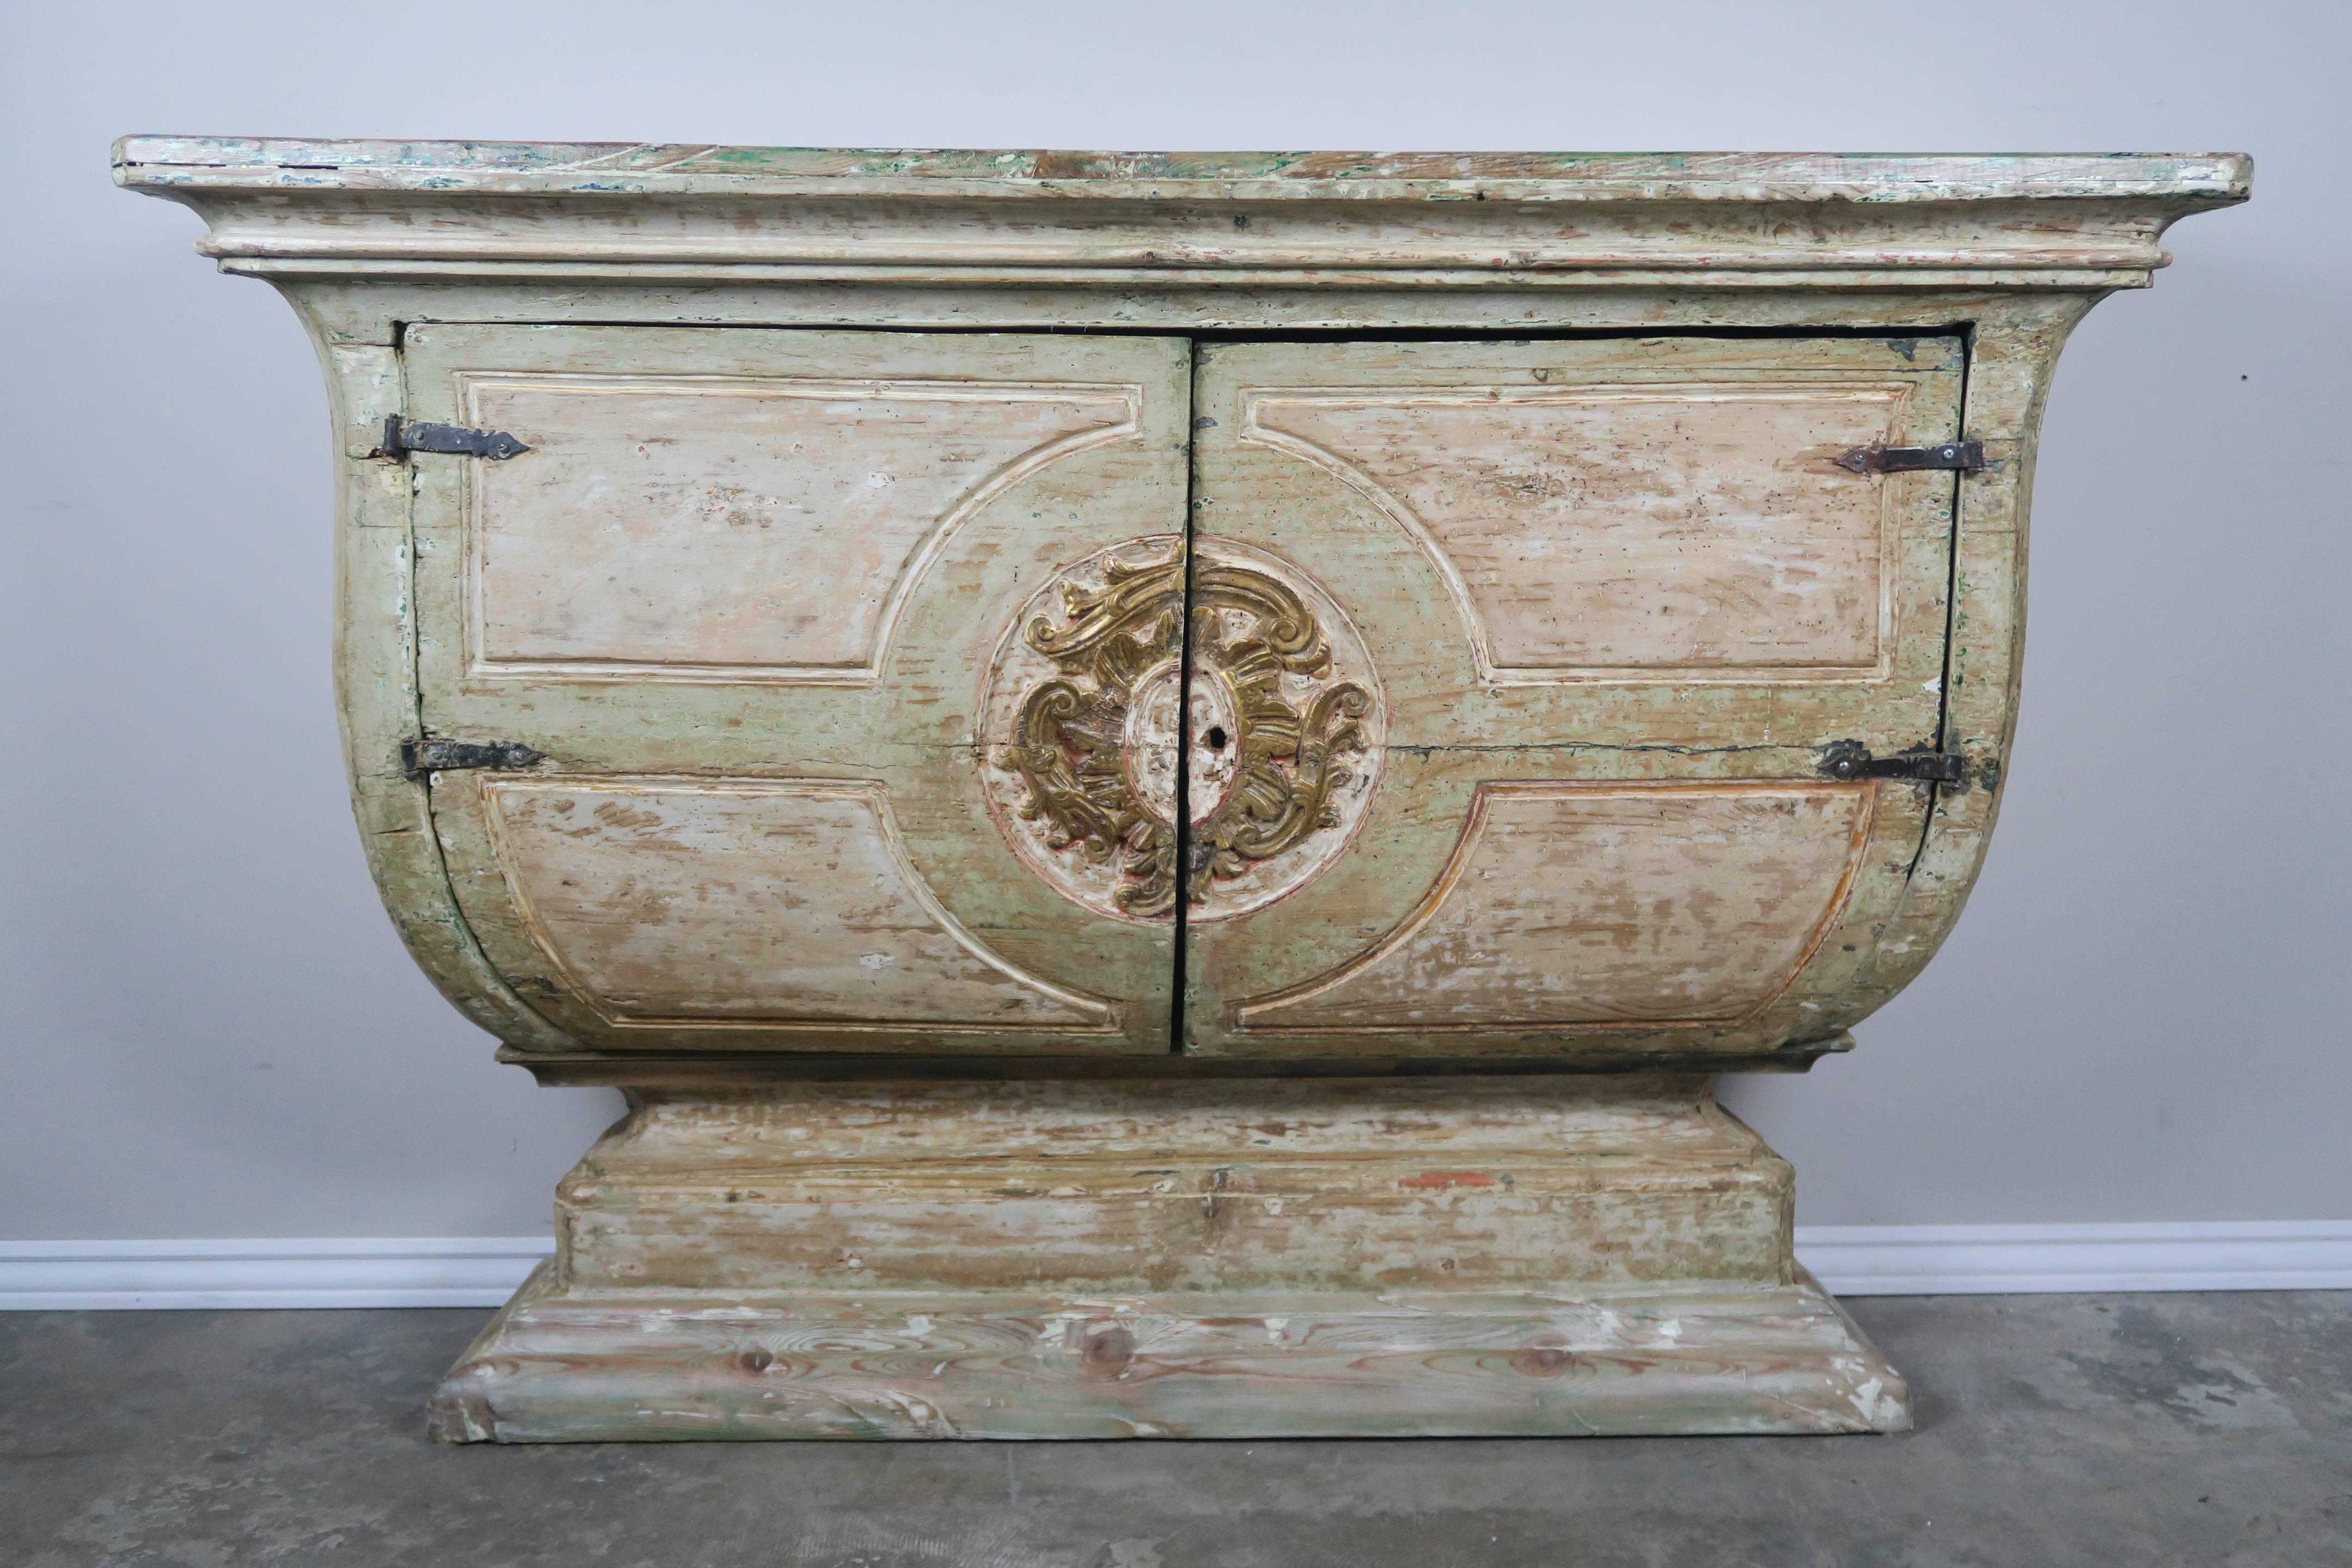 Early 19th century Italian painted and parcel-gilt console that was originally used as an alter table. The table has two doors hiding storage and one shelf behind. The console is painted a soft sea foam green and cream coloration with great wear to